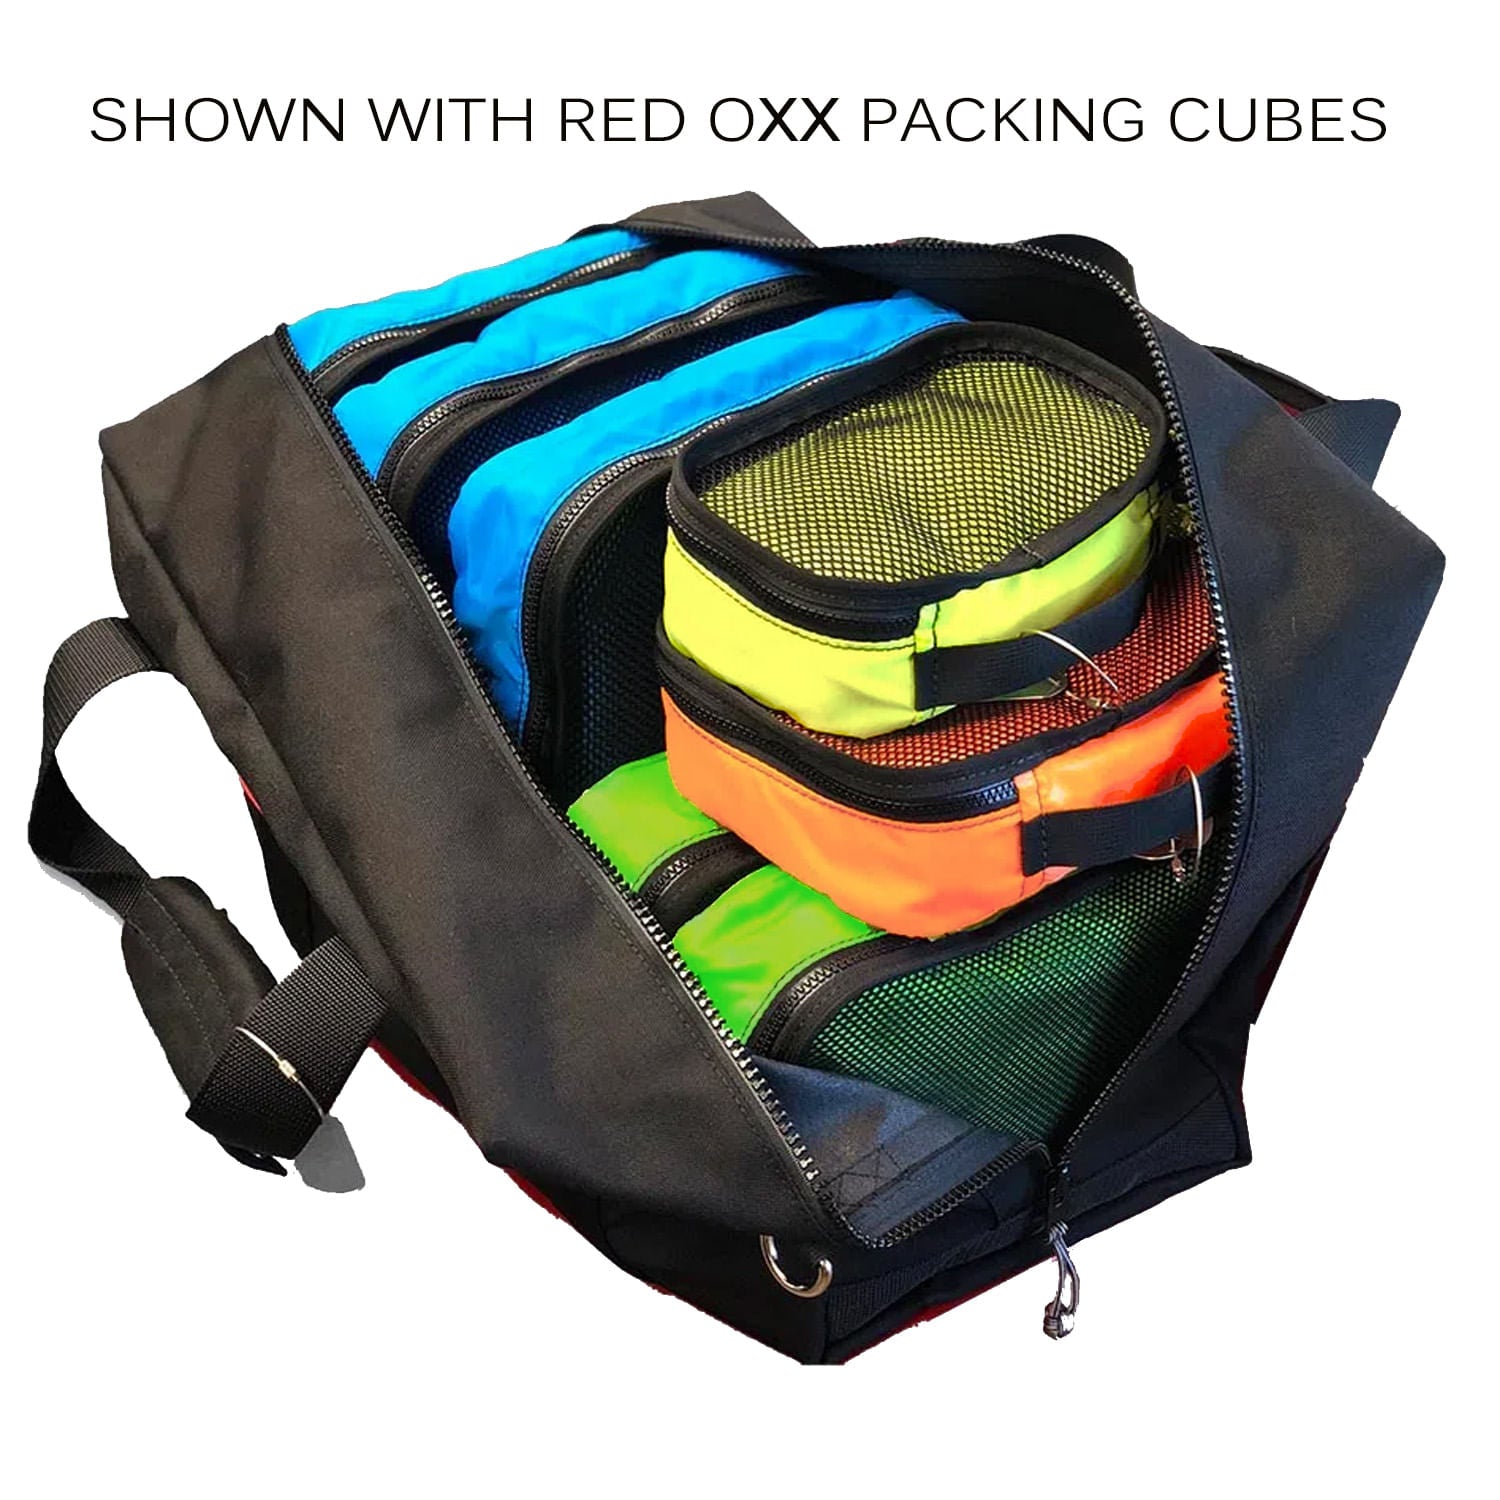 Small aviator kit bag with Red Oxx packing cubes.